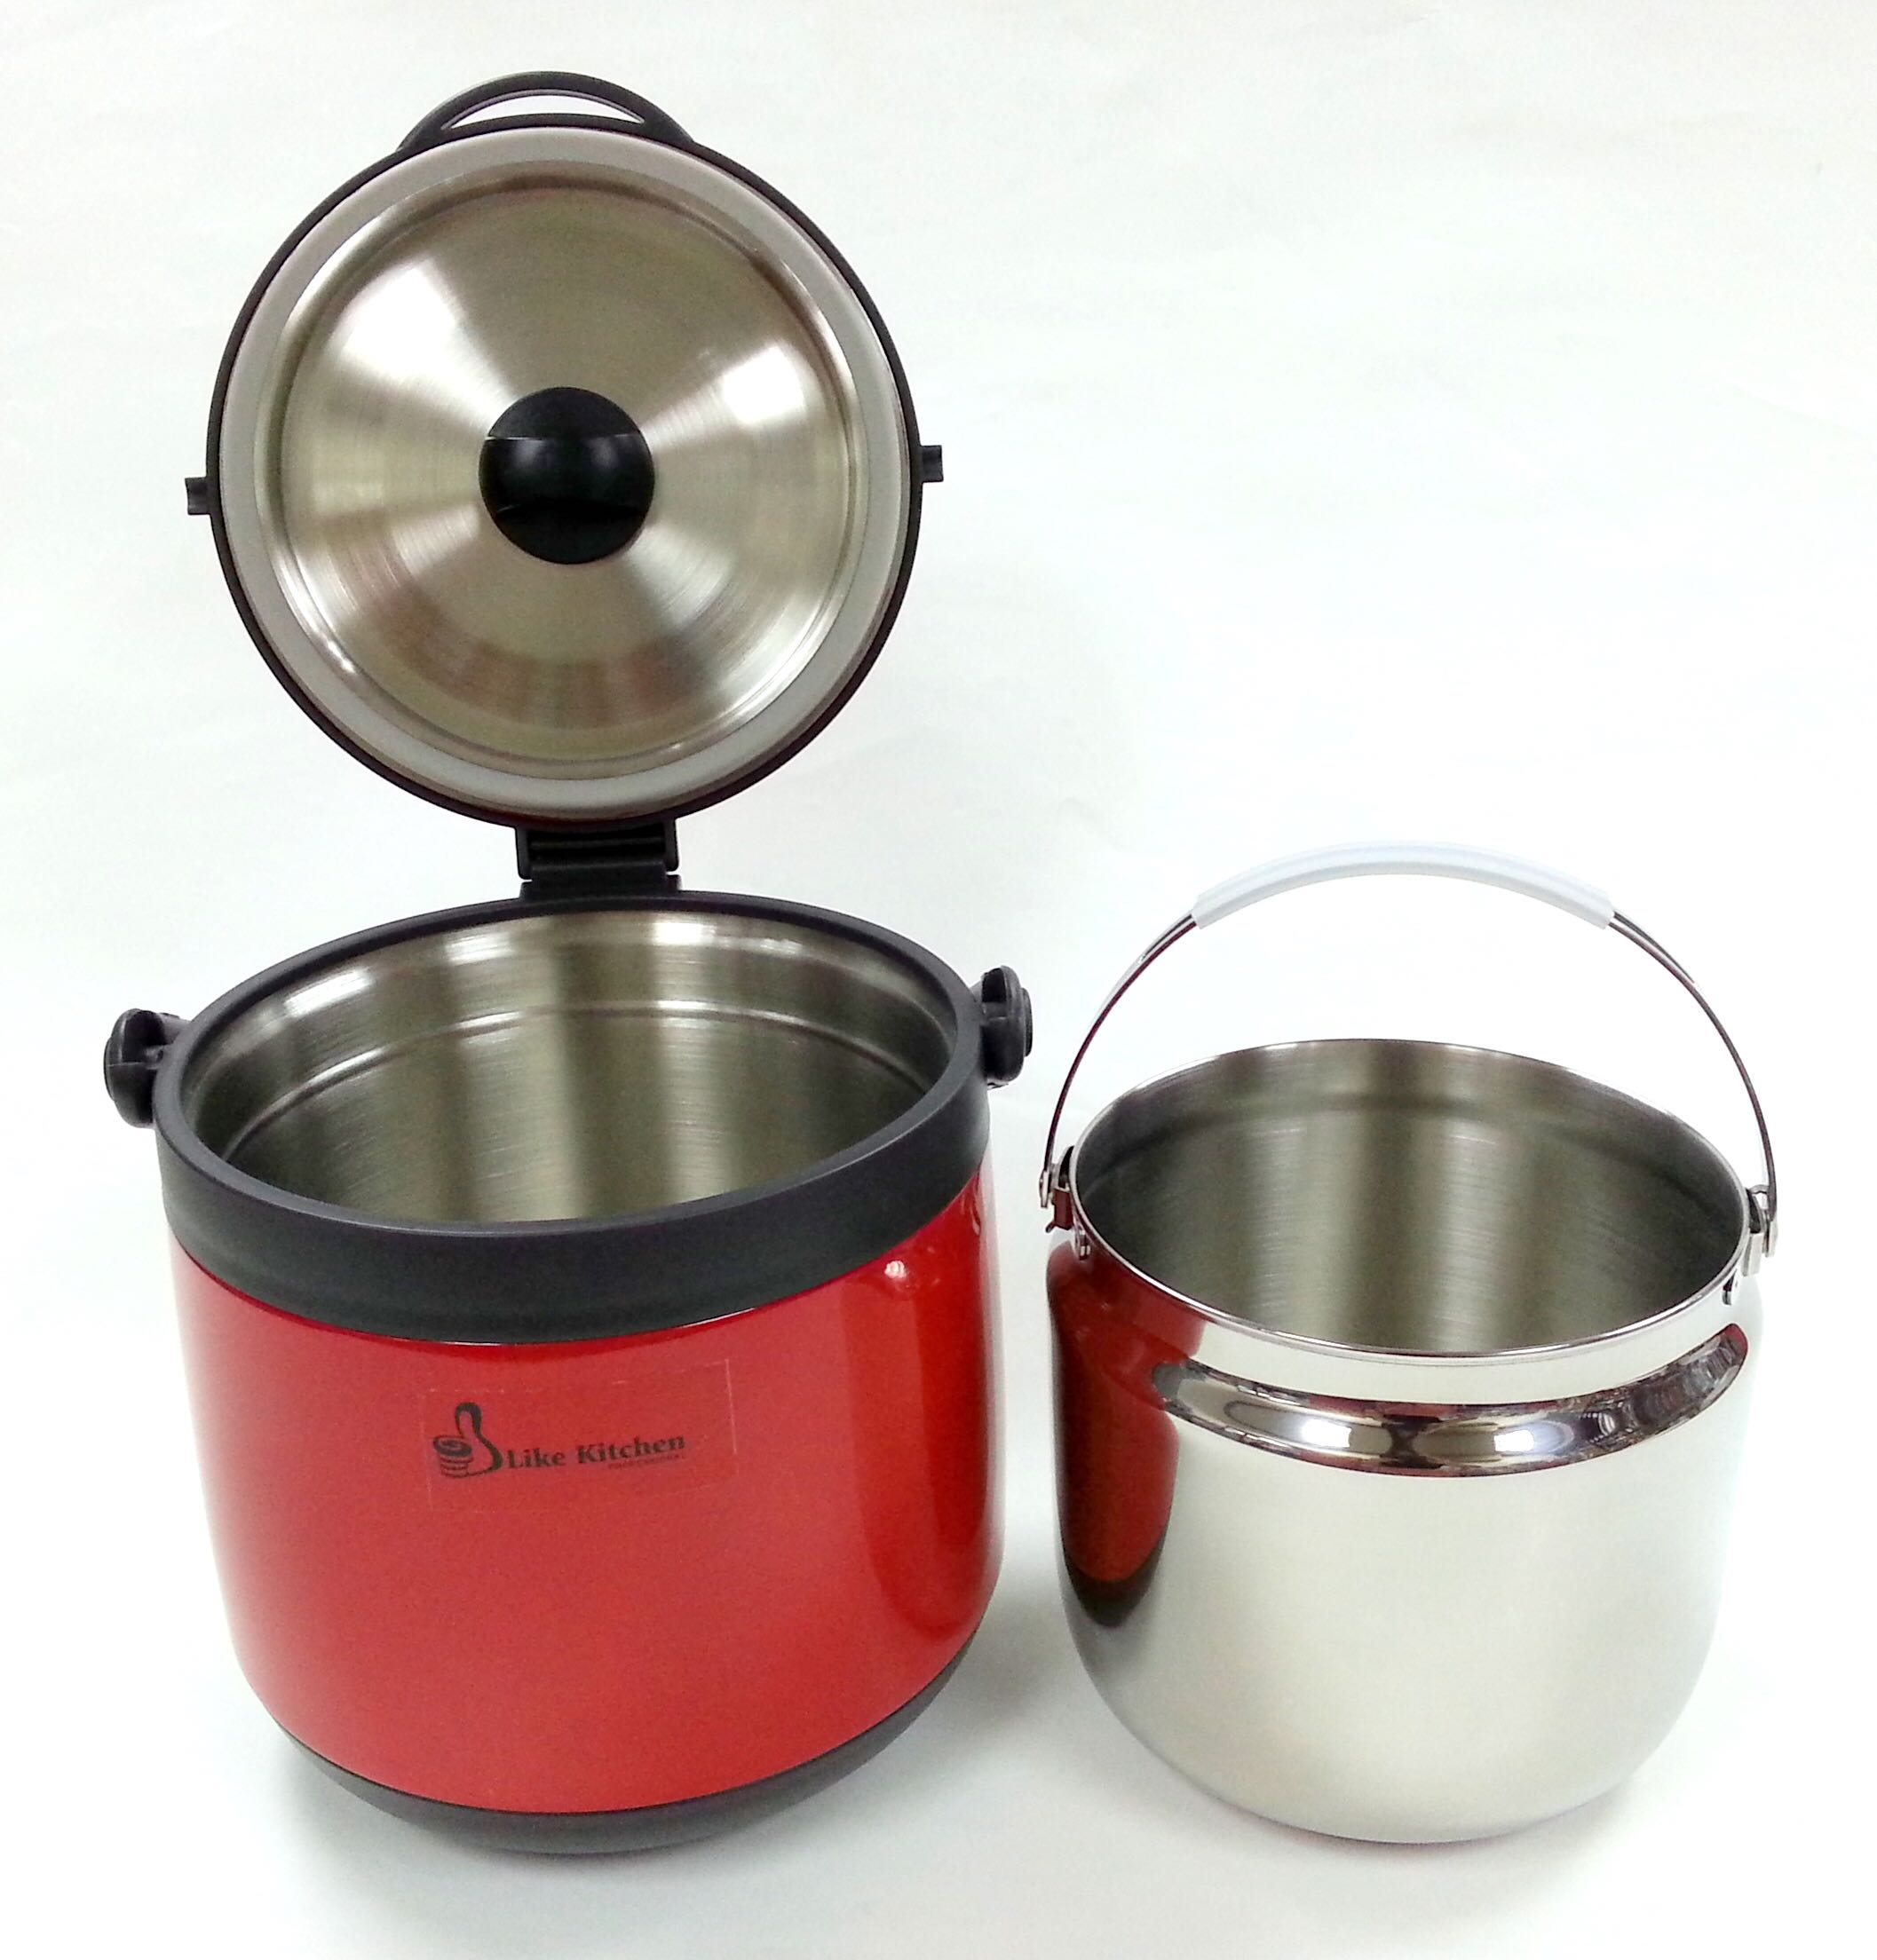 Like Kitchen 188 Stainless Steel Eco Thermal Cooker 45l